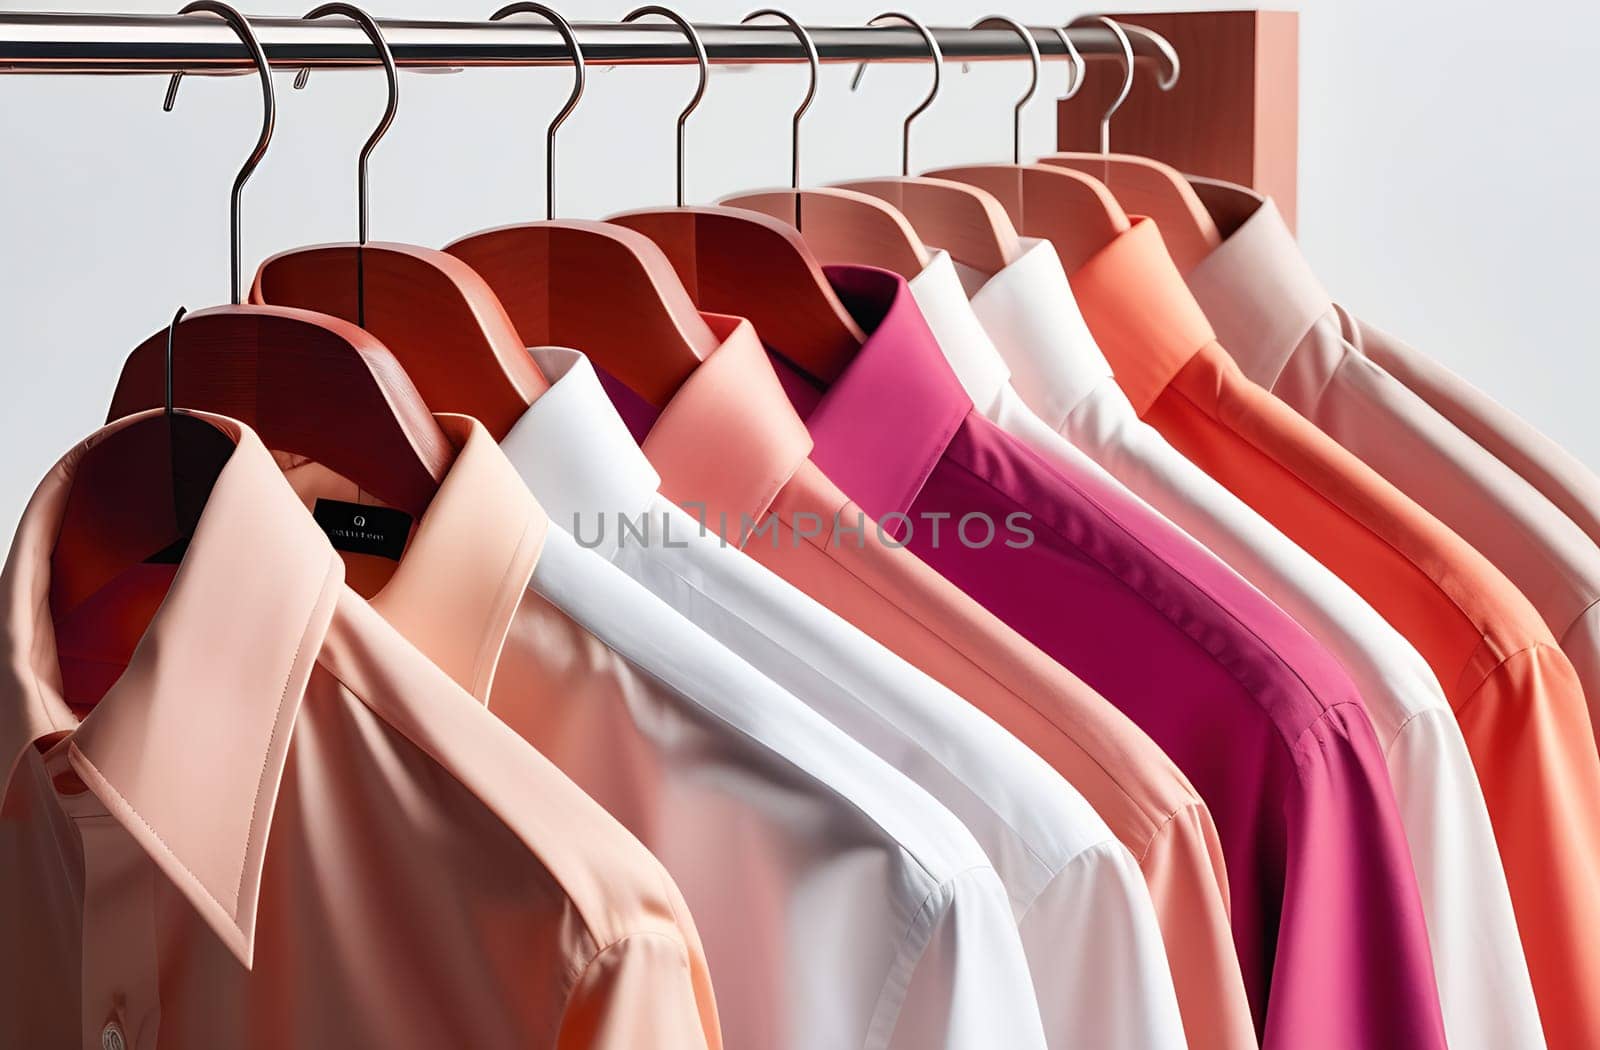 Men's shirts hanging in a row on a hanger, close-up, clothing and fashion concept.